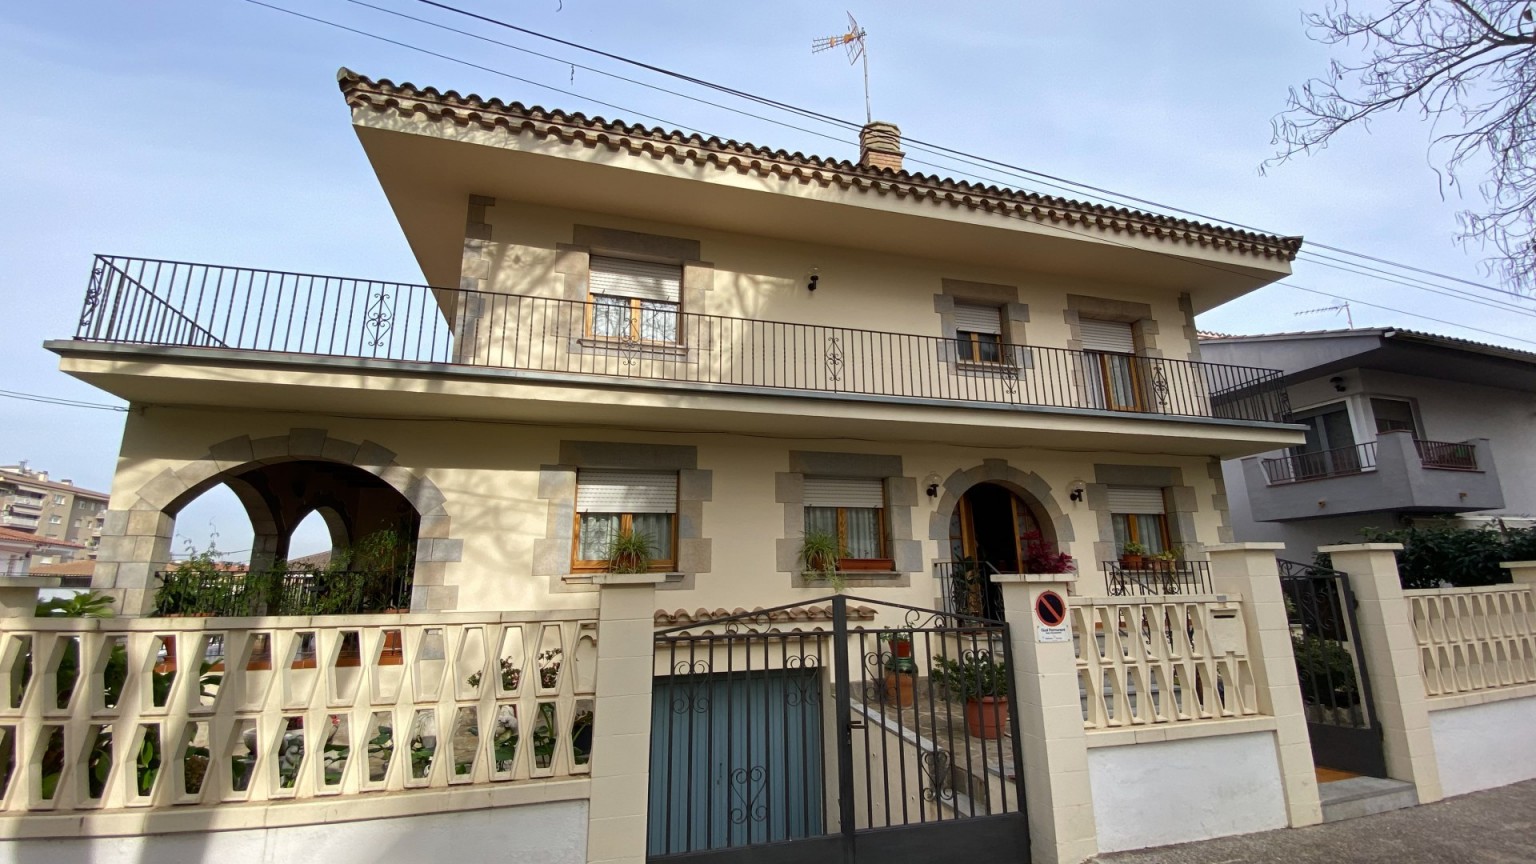 Fantastic house for sale in the Montilivi-Pericot area